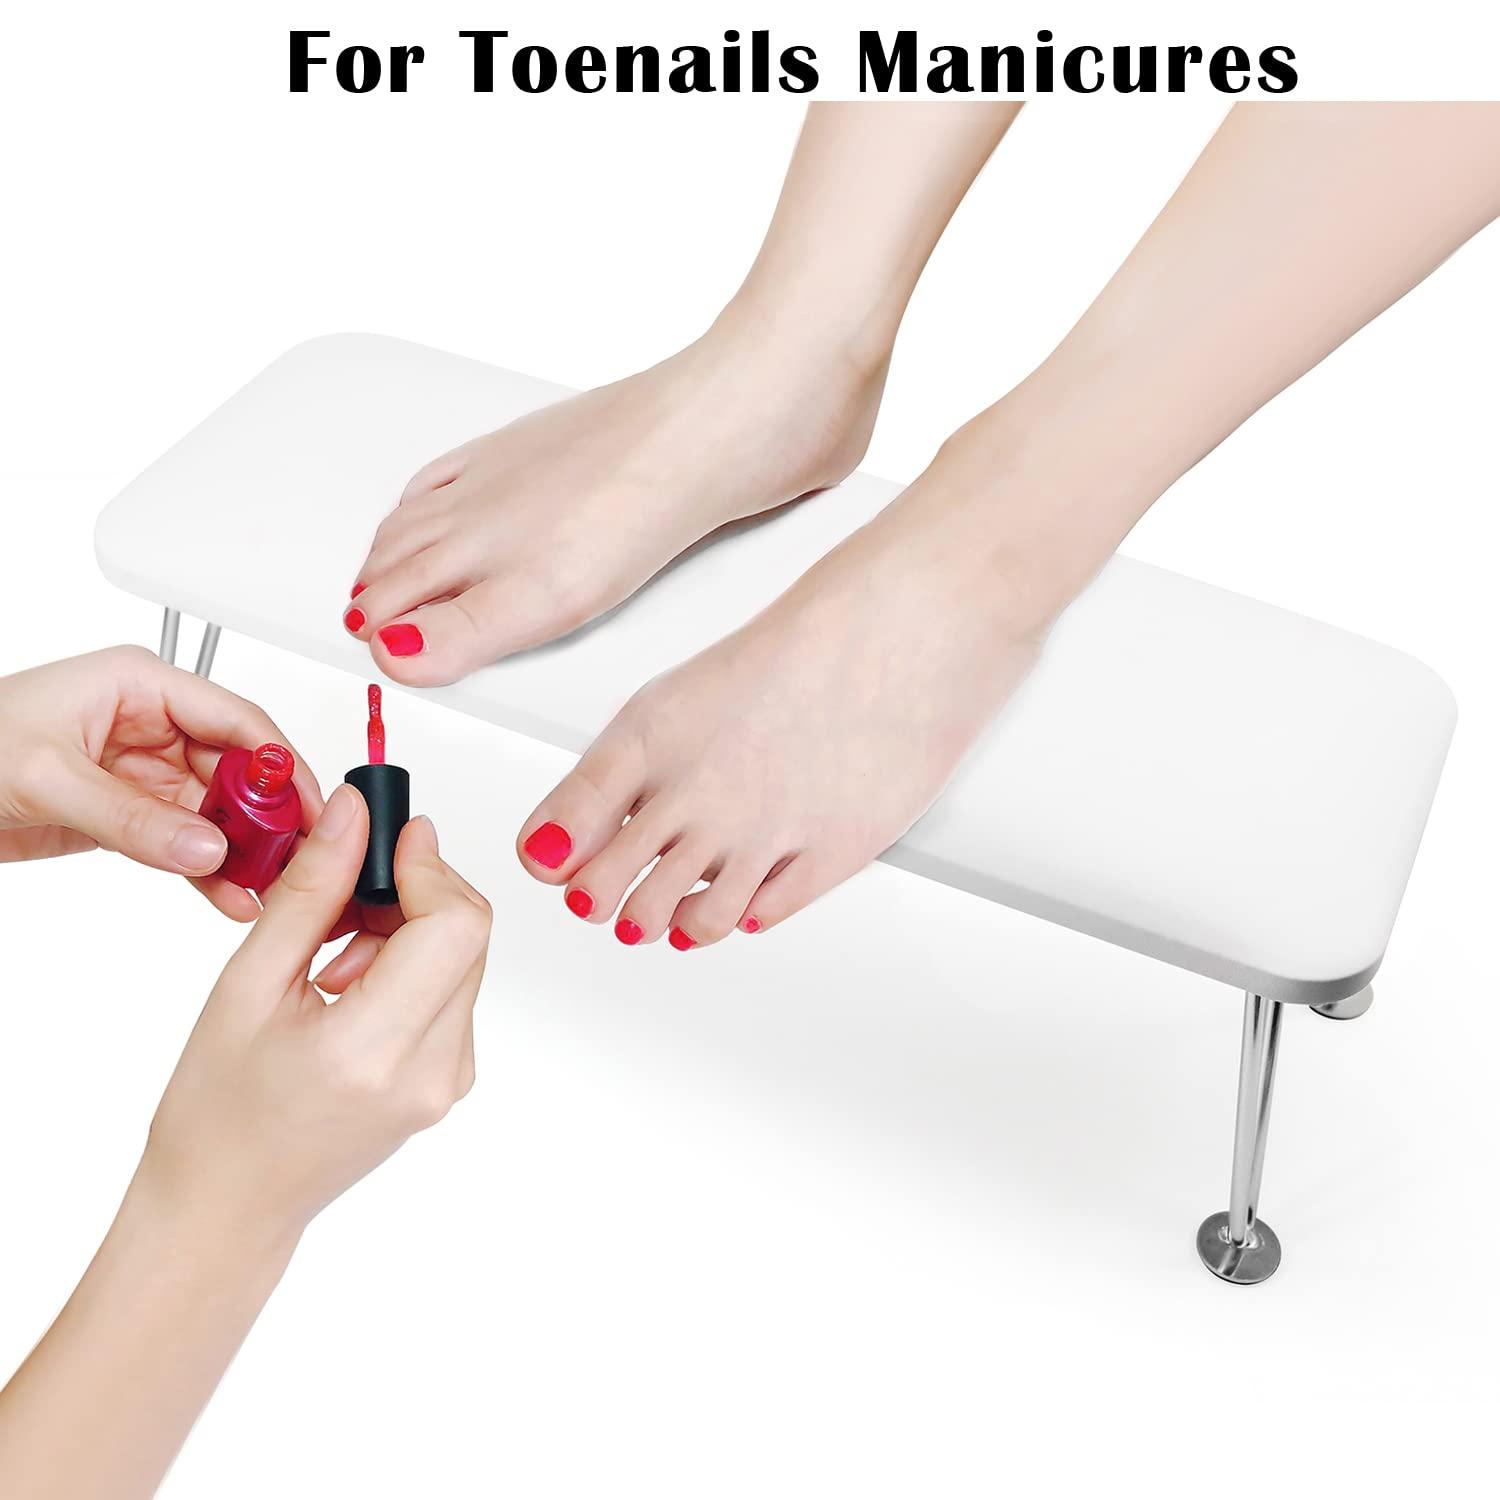 Foldable Nail Arm Rest, Pu Leather Nail Hand Rest For Nails Tech With Table  Mat, Soft Hand Rest Stand For Acrylic Nail